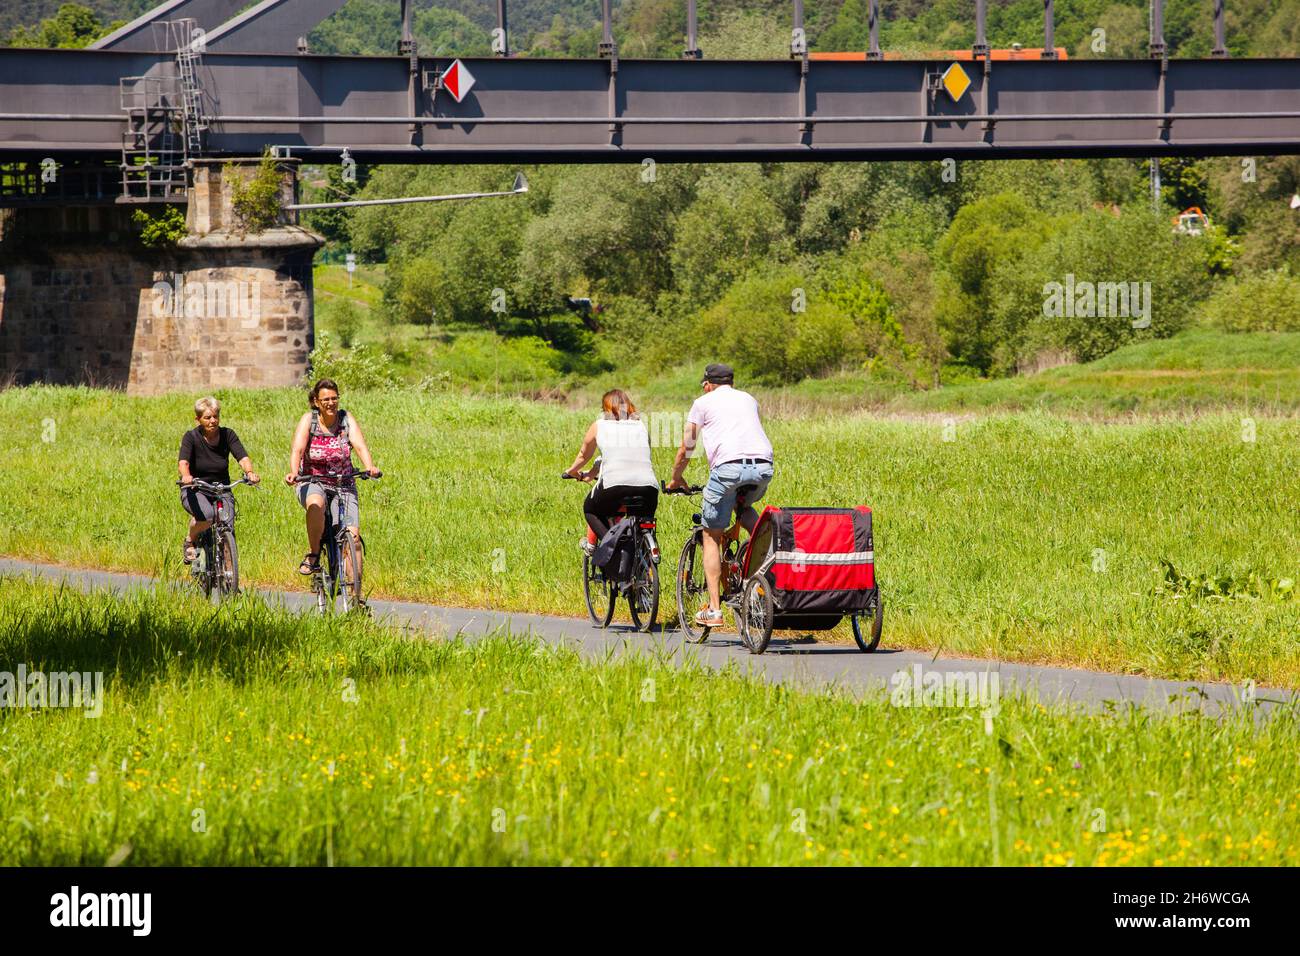 Cyclists ride on a bike path along the Elbe river Germany People on cycle route with bike trailer Stock Photo